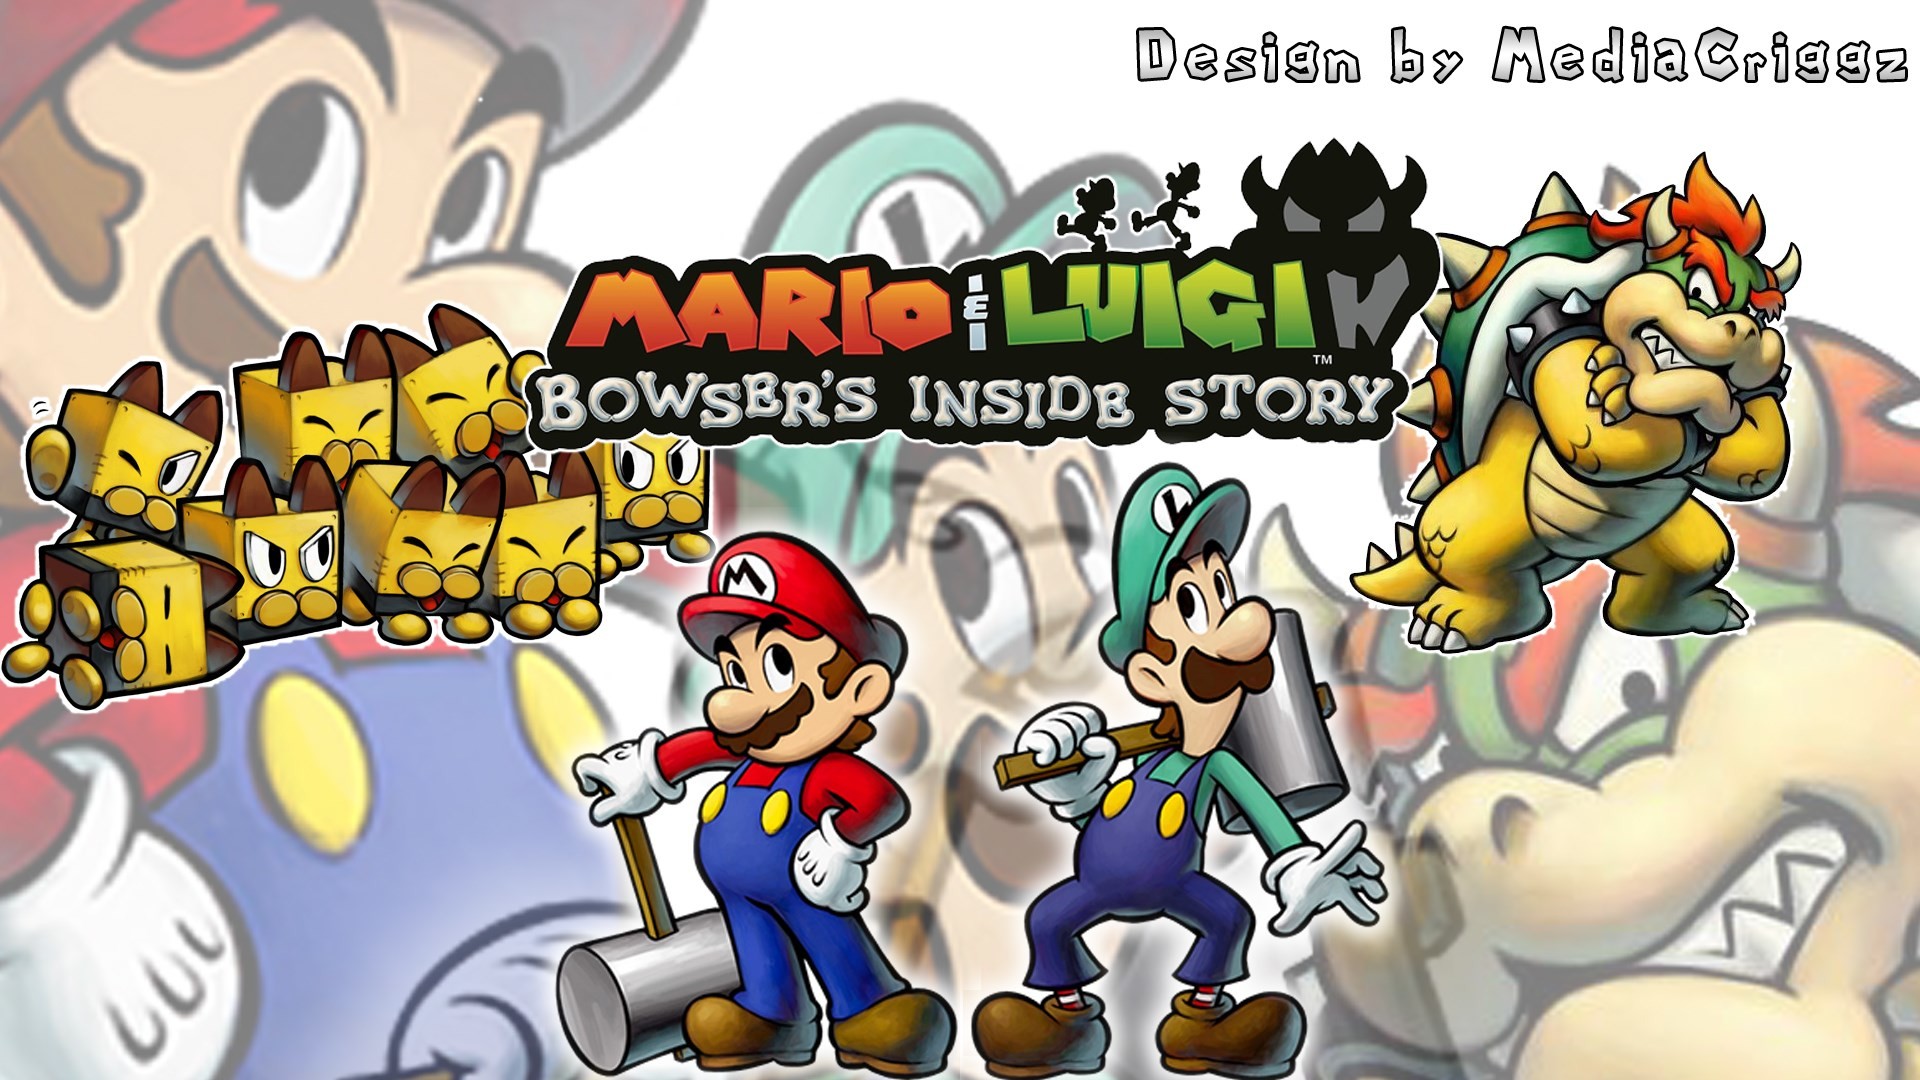 1920x1080 mario and luigi bowsers inside story free desktop wallpaper by Harvey Grant  (2017-03